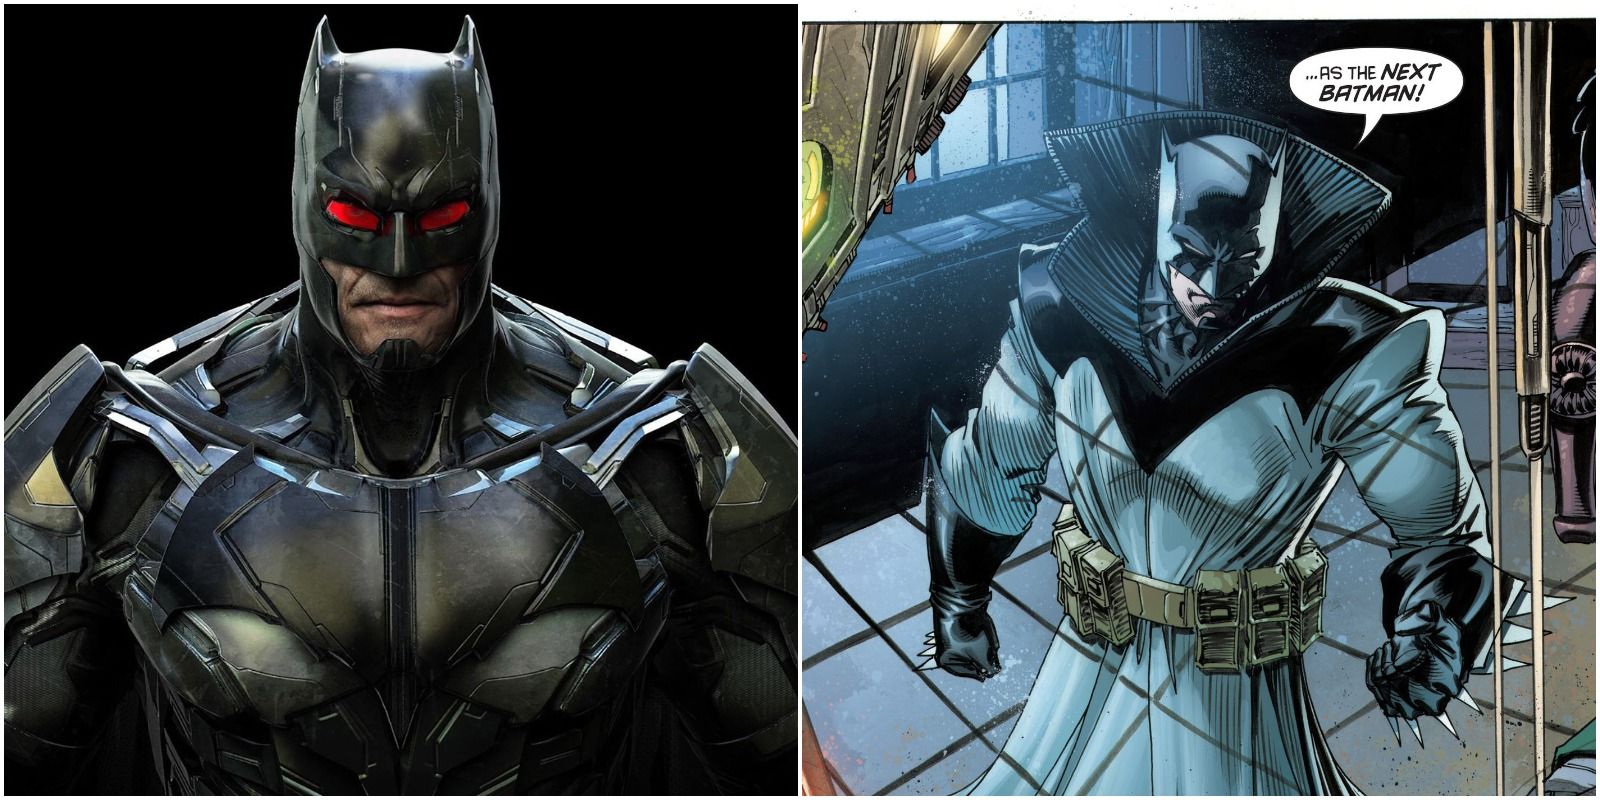 Alleged concept design of a Damian Wayne Batman for a cancelled game, and a panel from Batman #666 with Damian